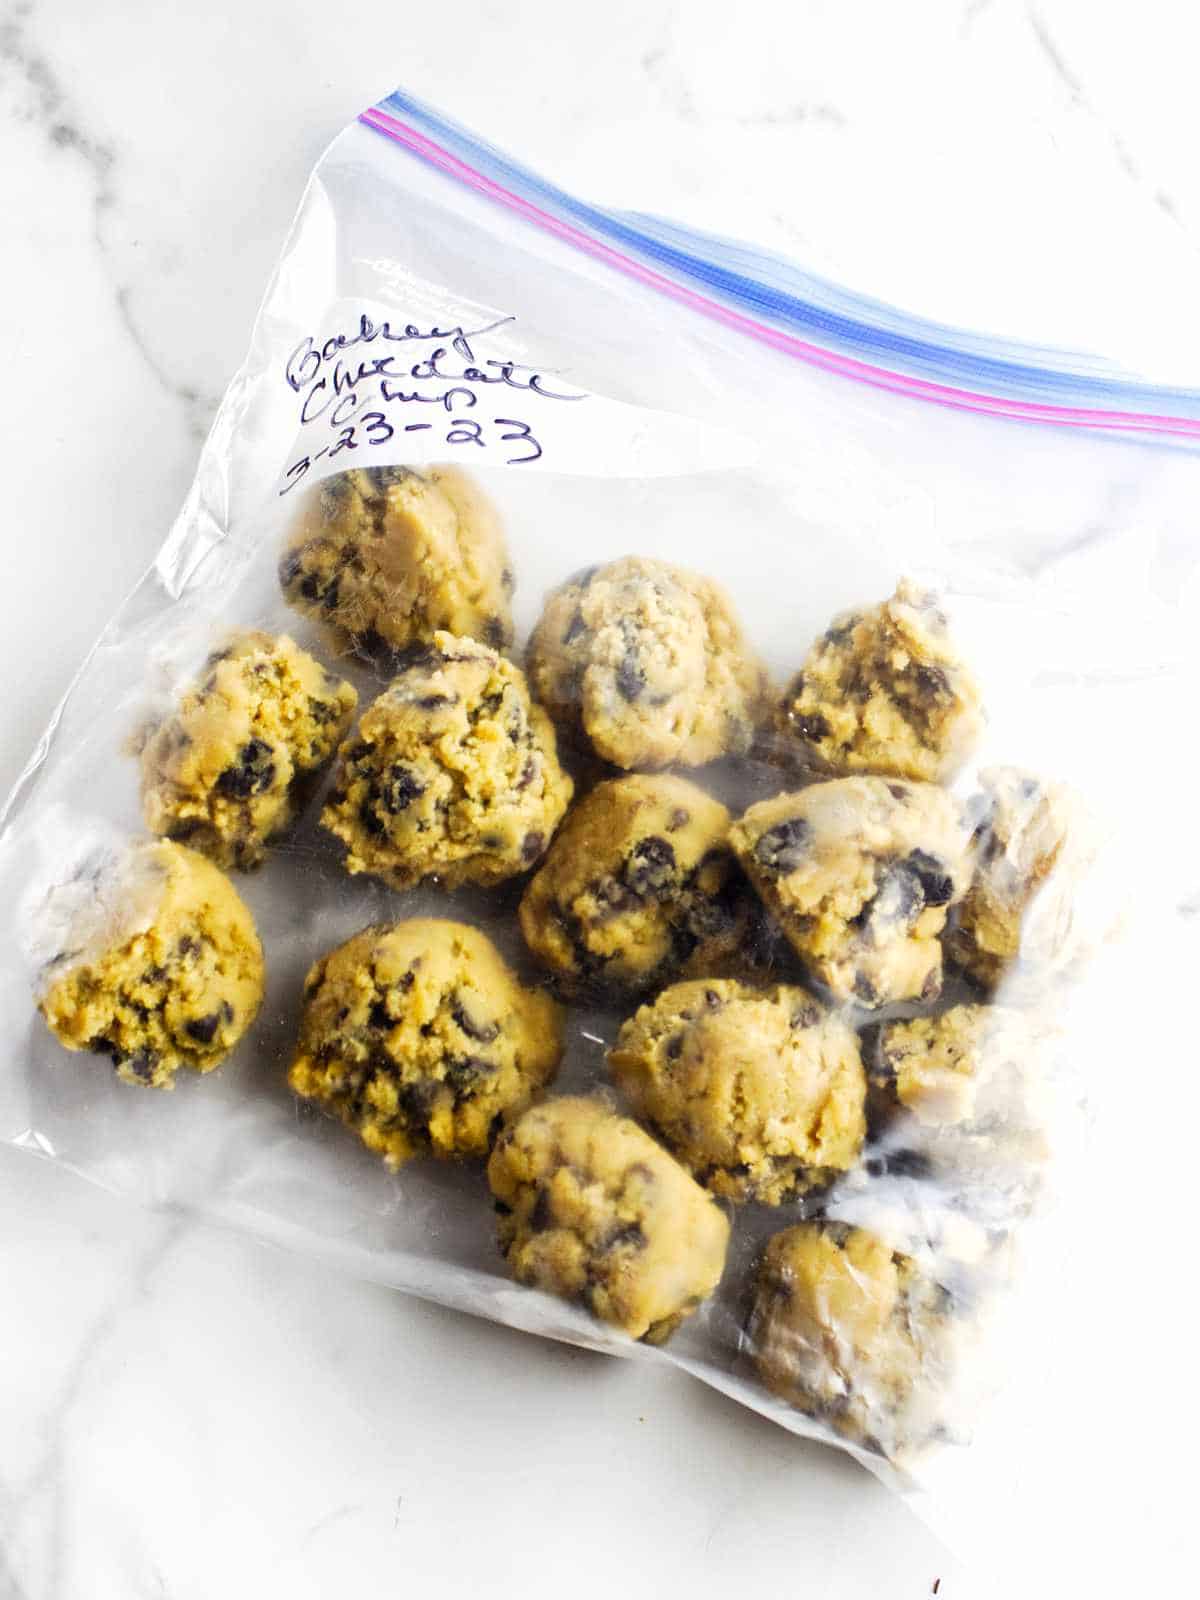 freezer bag full of frozen bakery style chocolate chip cookies for storing in the freezer.